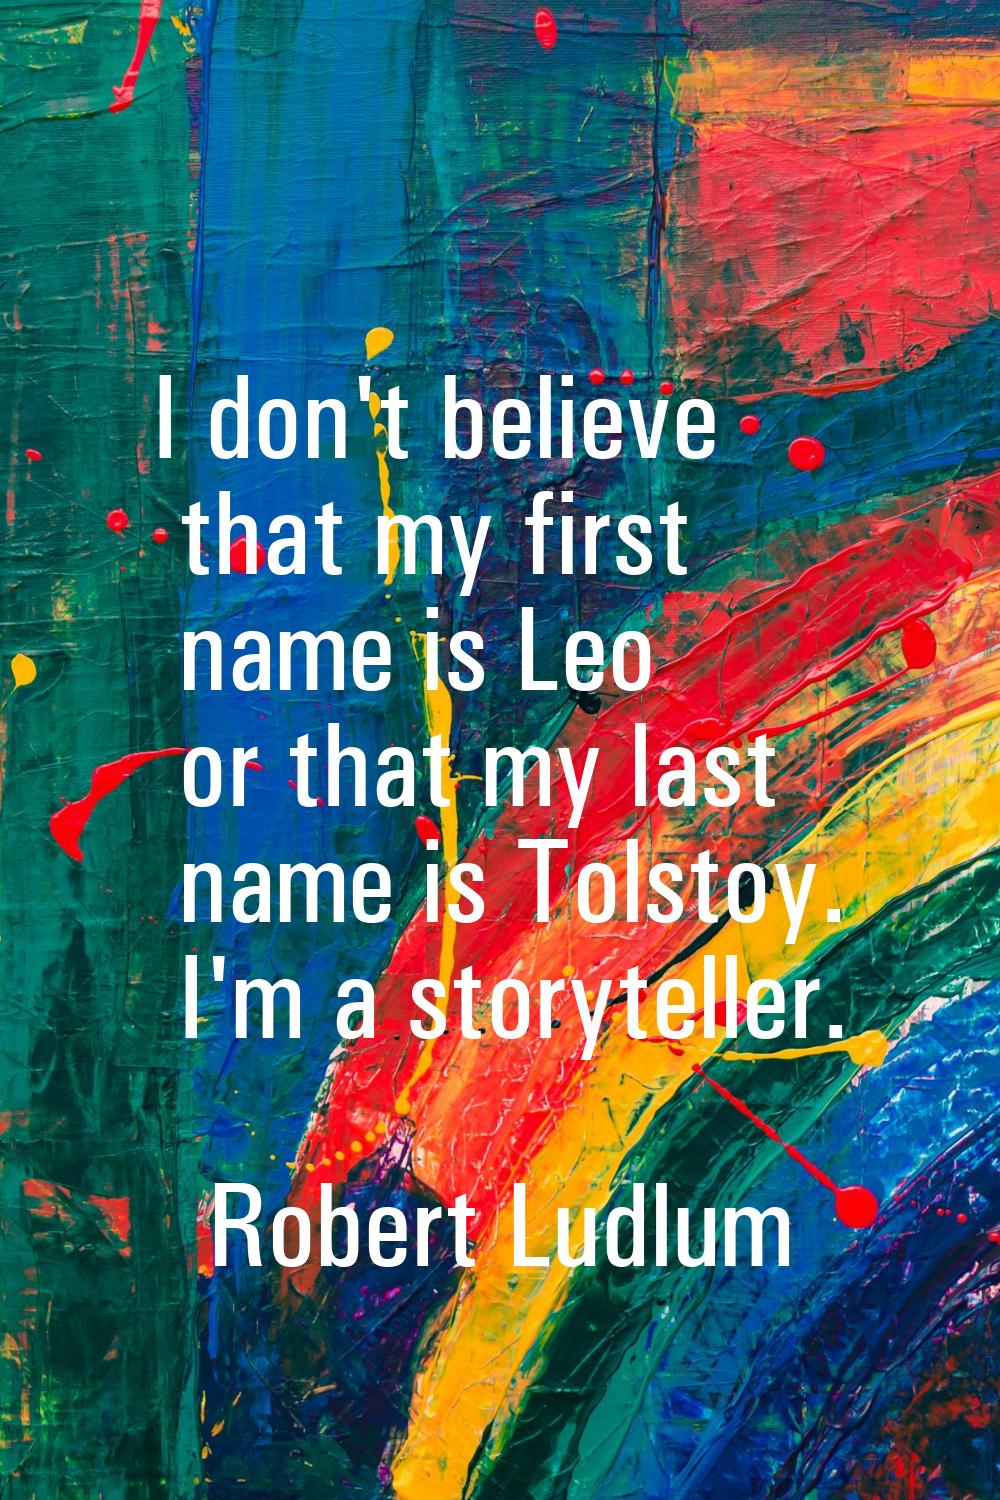 I don't believe that my first name is Leo or that my last name is Tolstoy. I'm a storyteller.